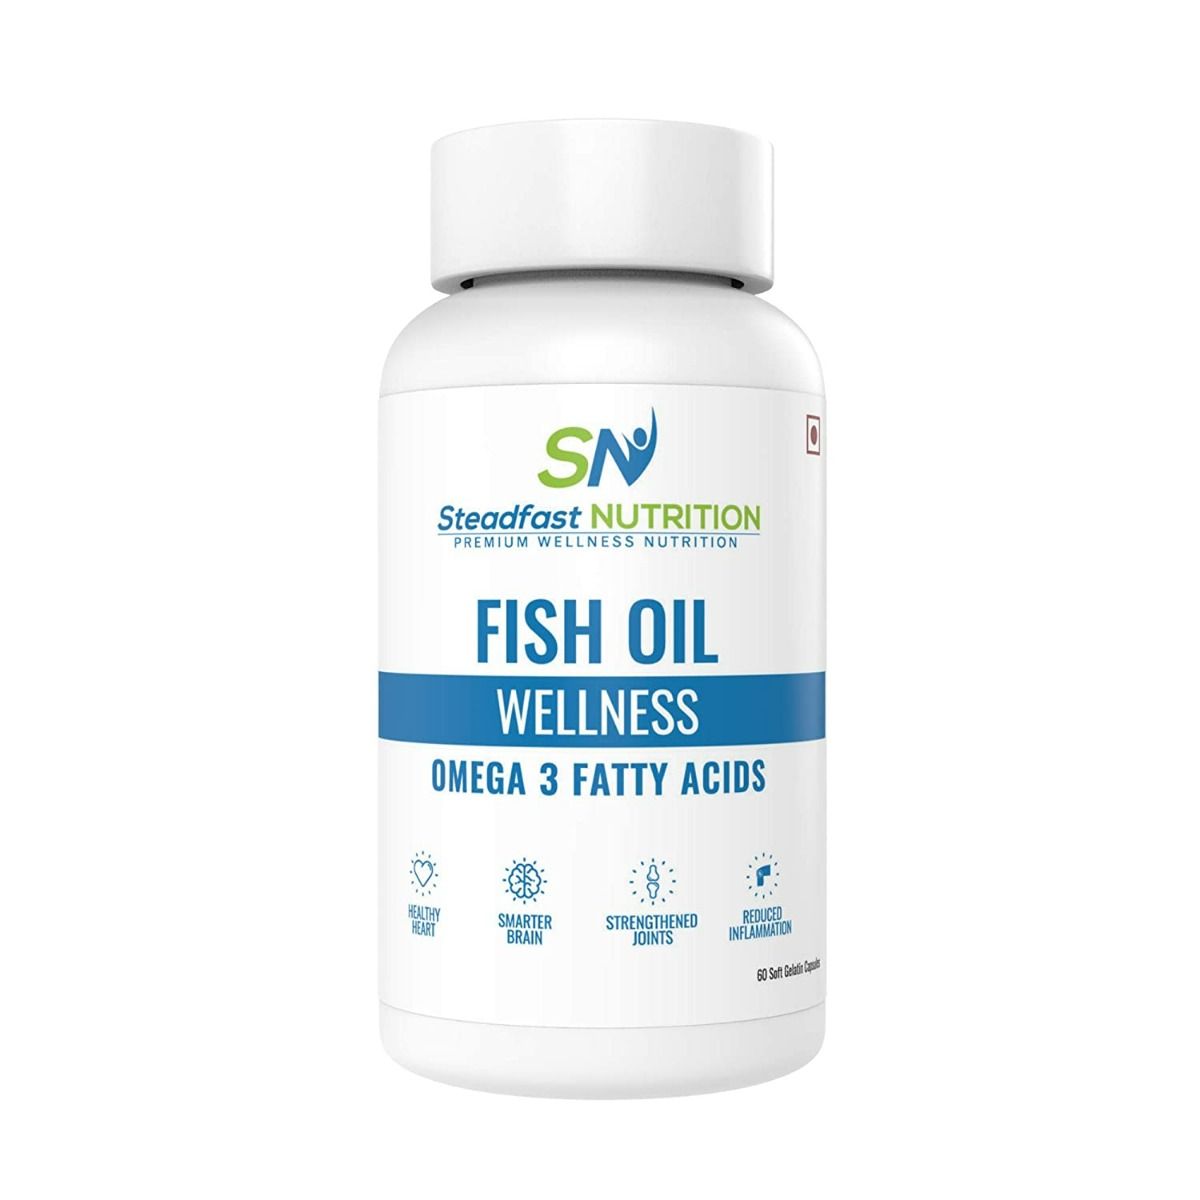 Steadfast Nutrition Fish Oil Wellness Omega 3 Fatty Acids Softgel Capsule, 60 Count, Pack of 1 